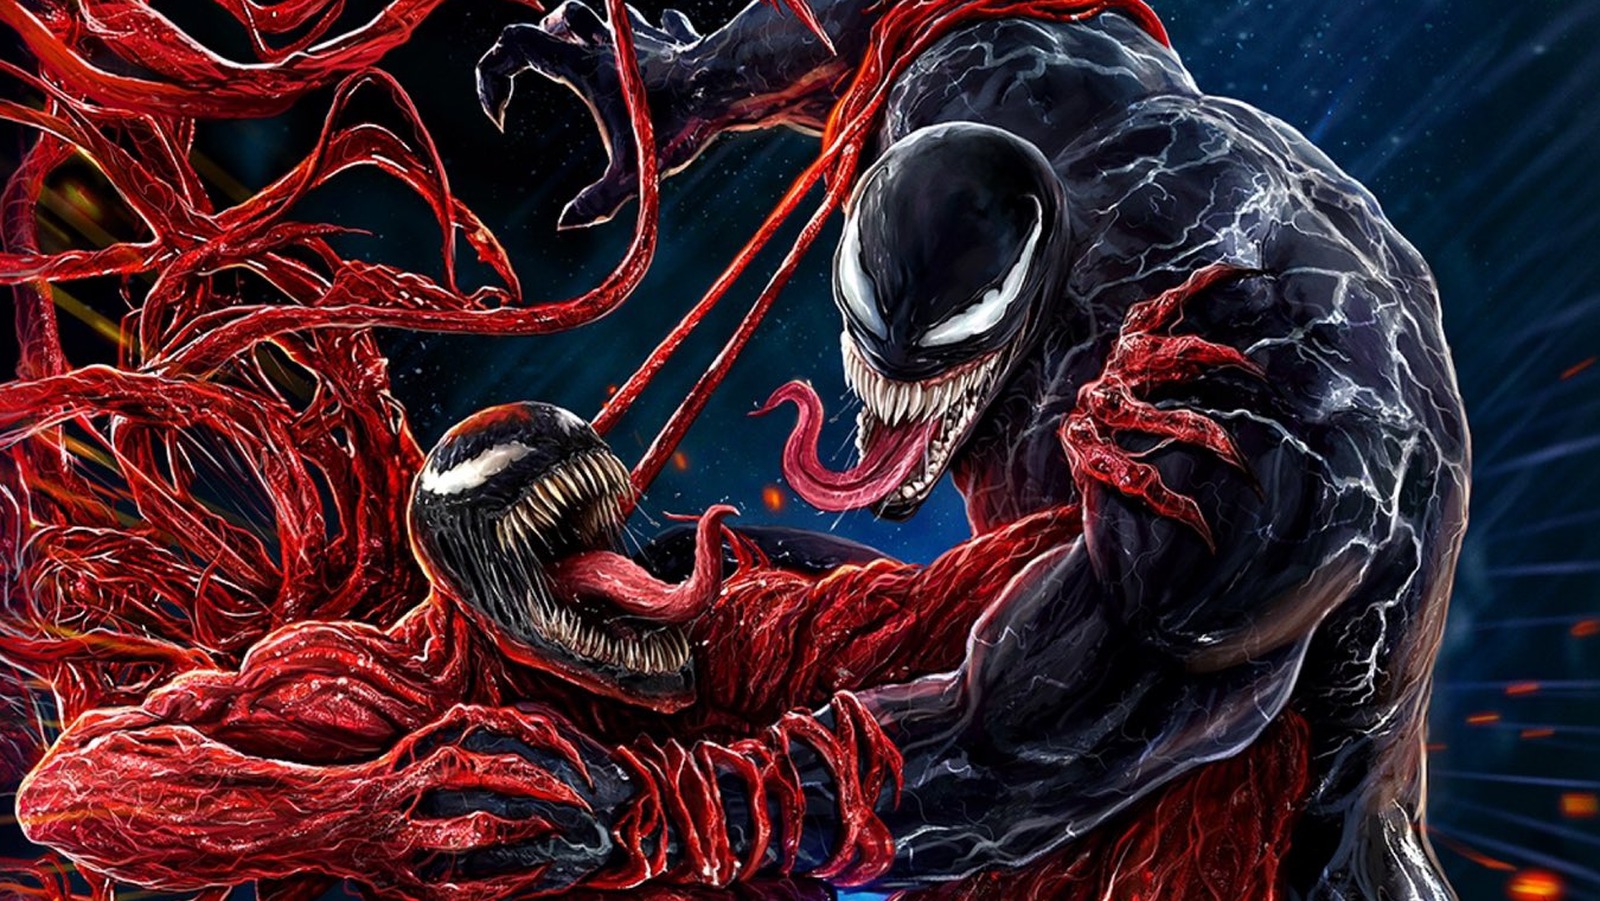 Venom: Let There Be Carnage Scores Biggest Box Office Opening Of 2021